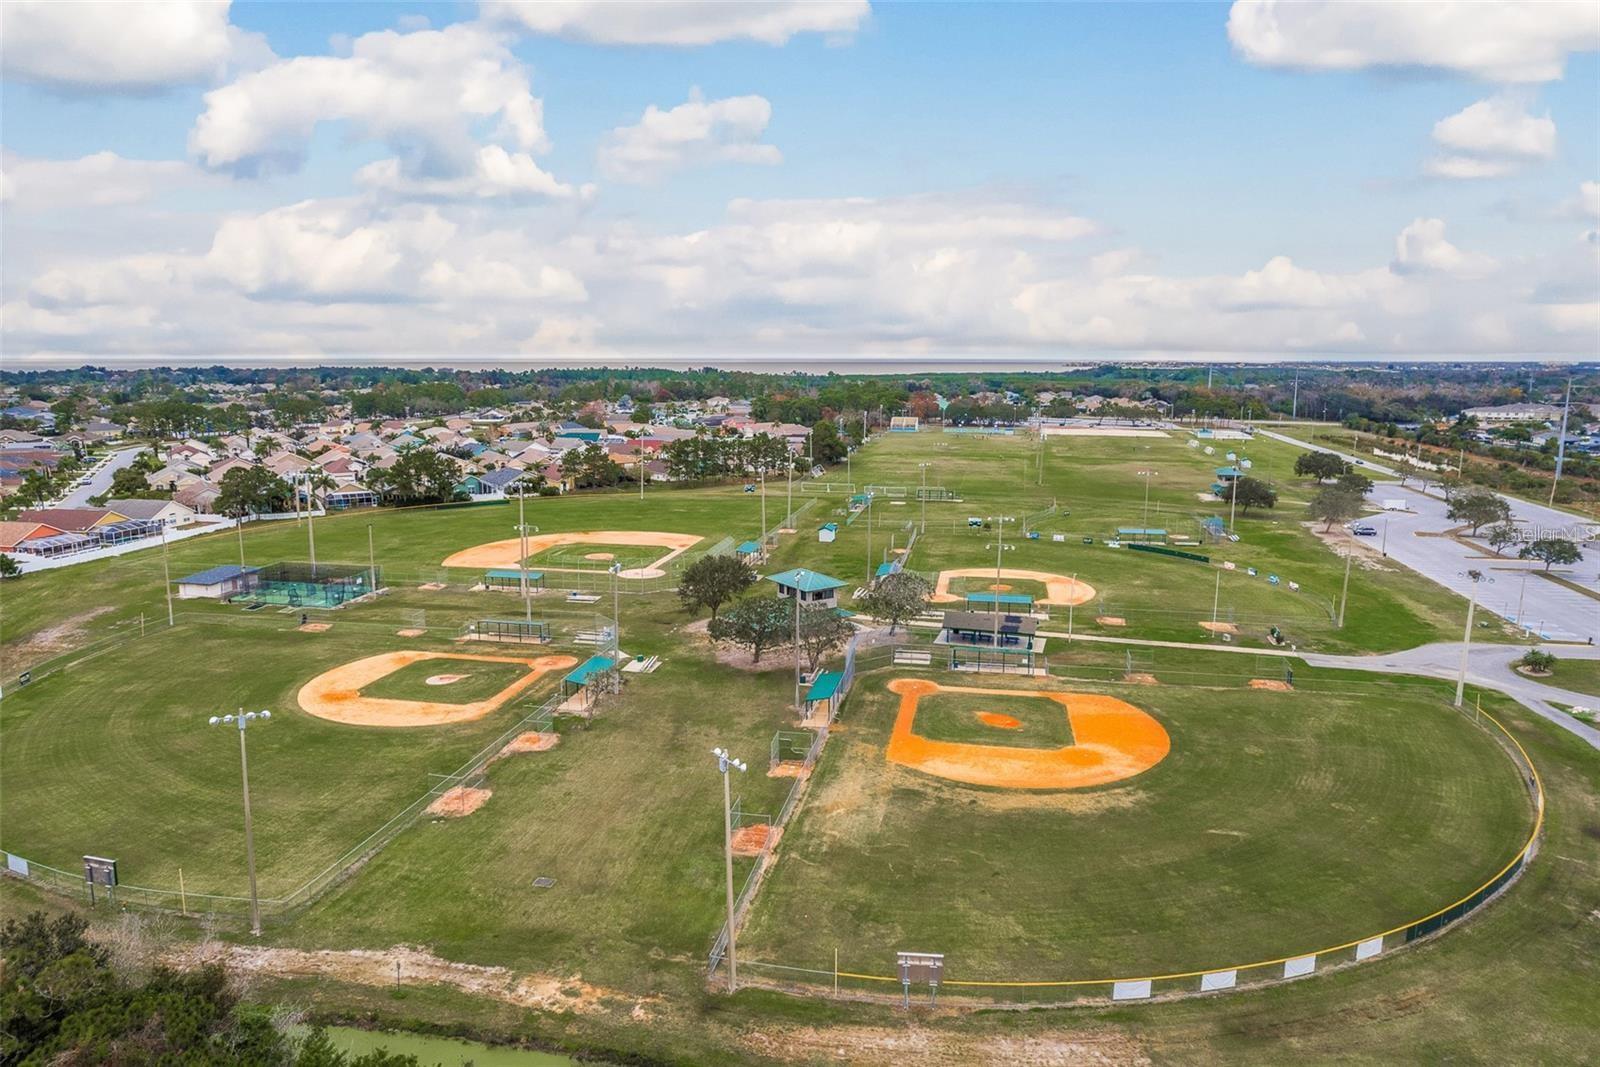 Arial view of the baseball fields